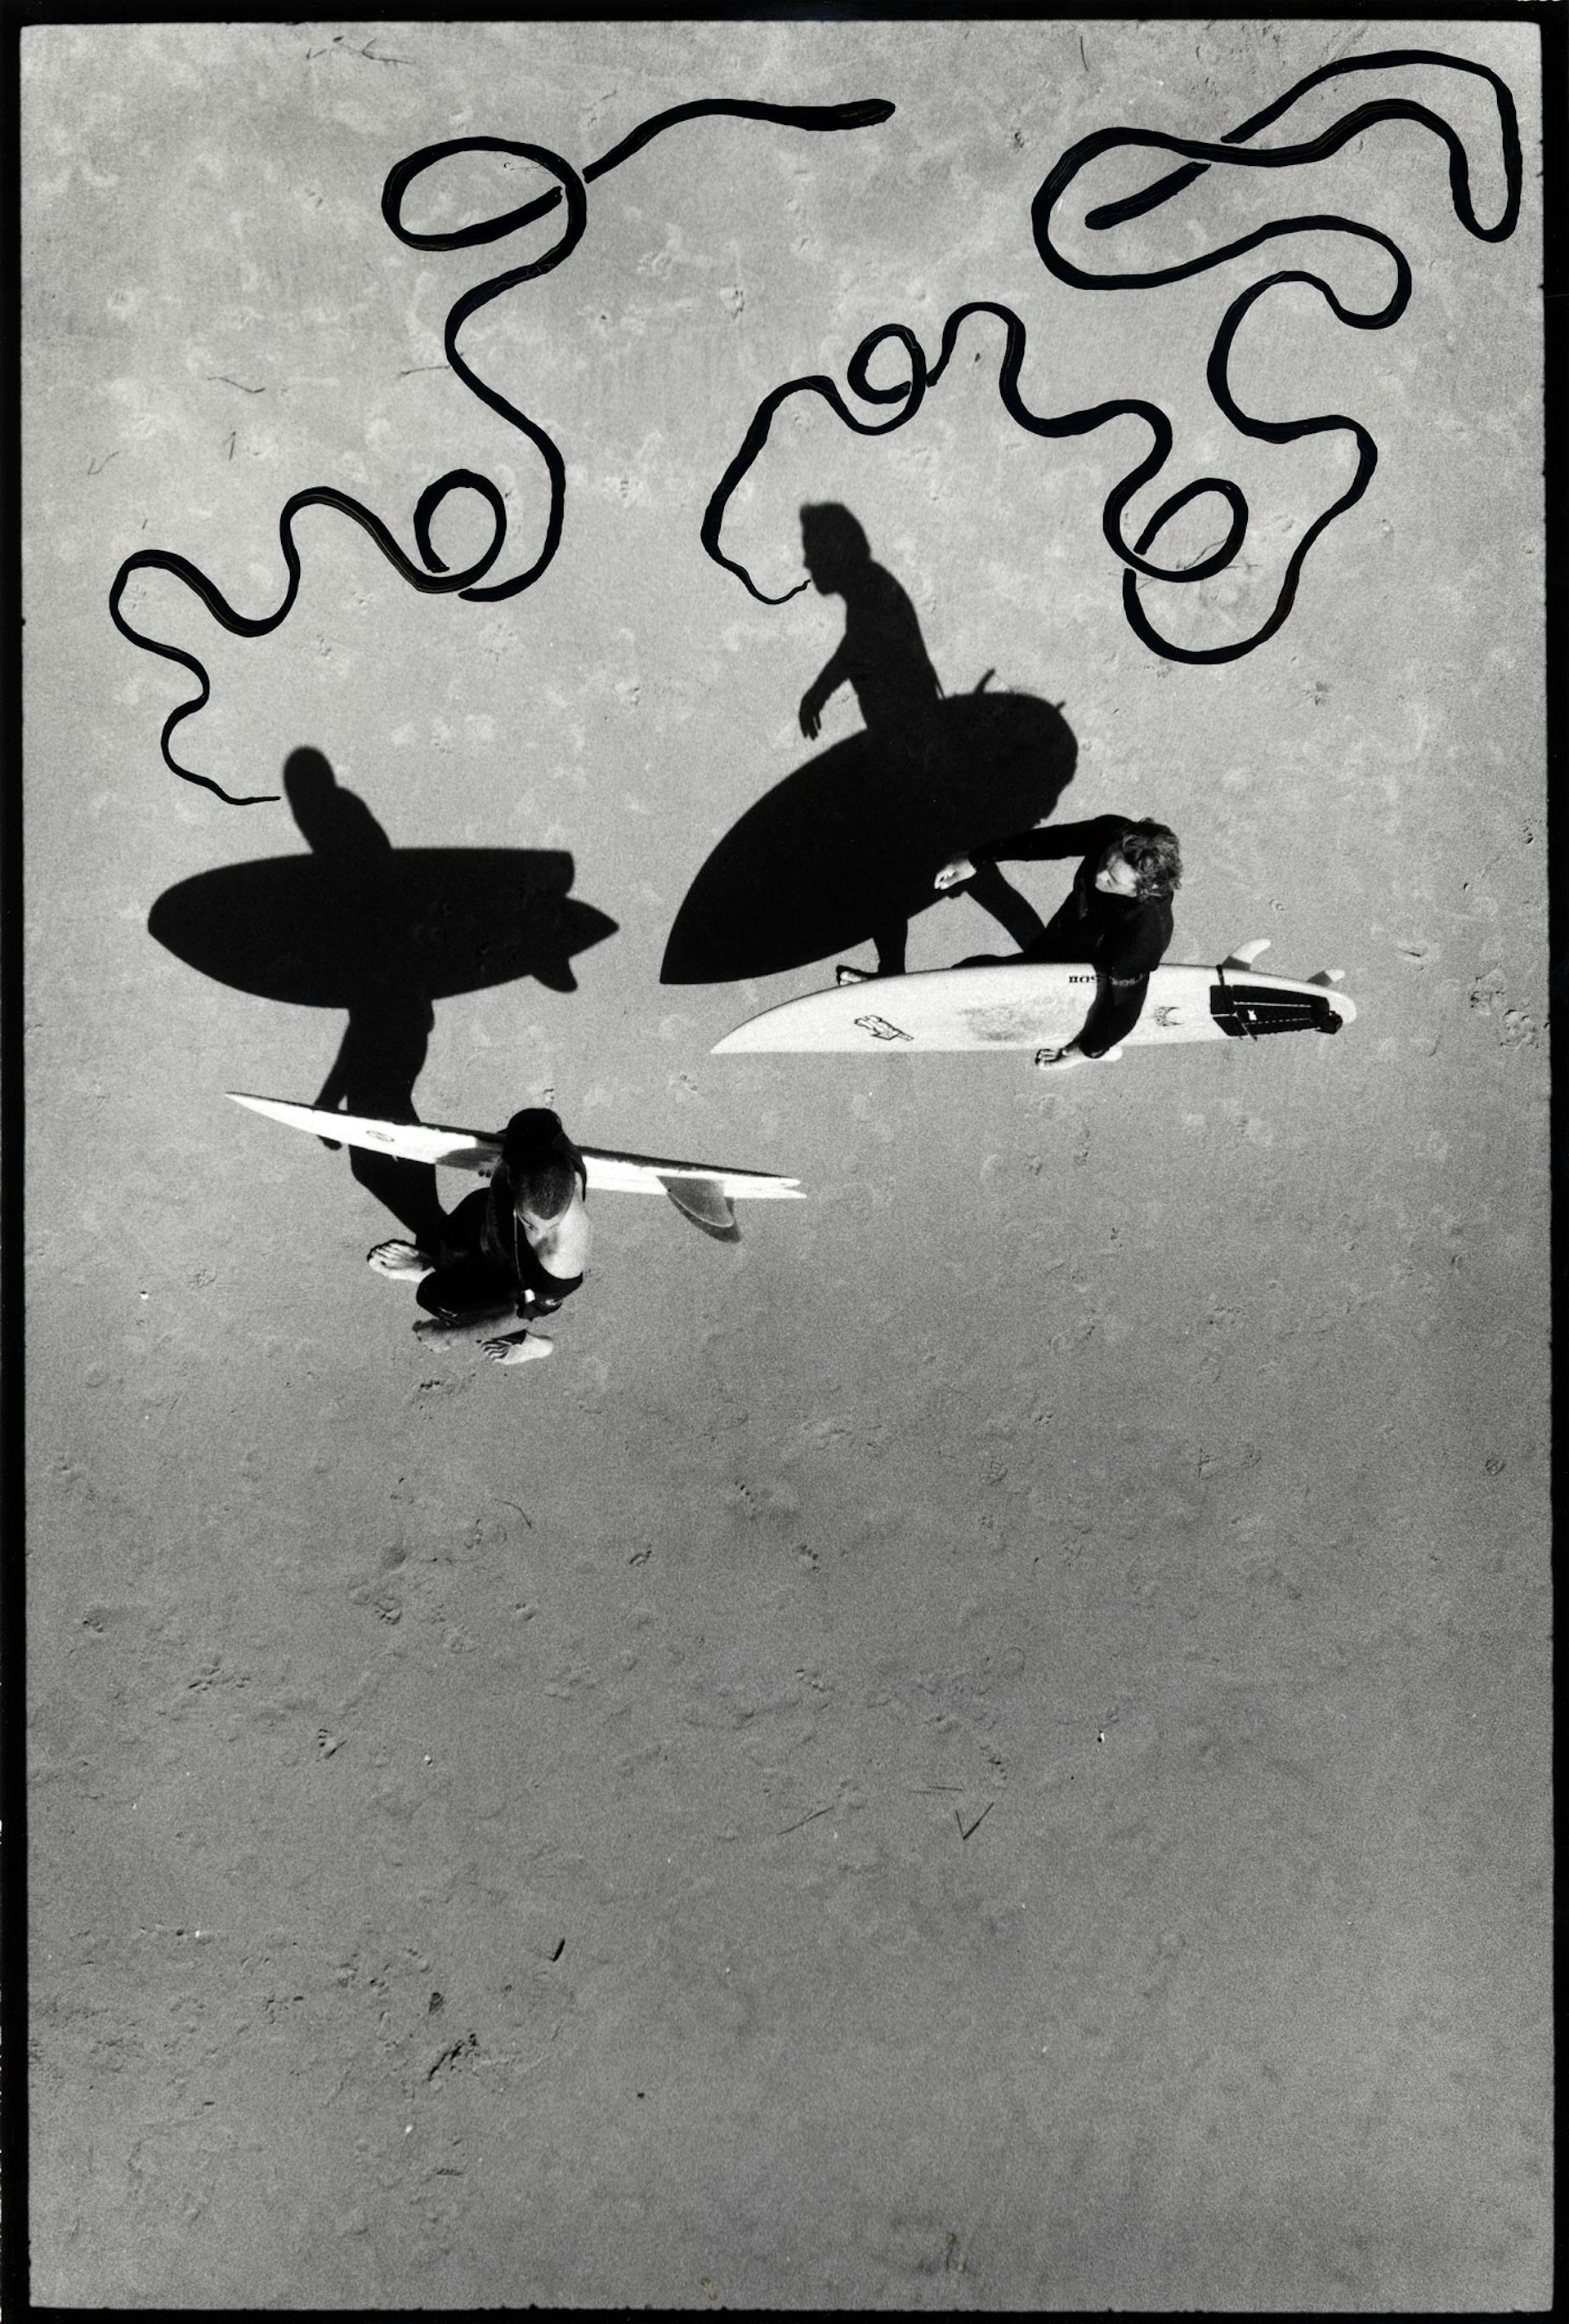 Surfers-and-shadows-from-Pier-HB-art